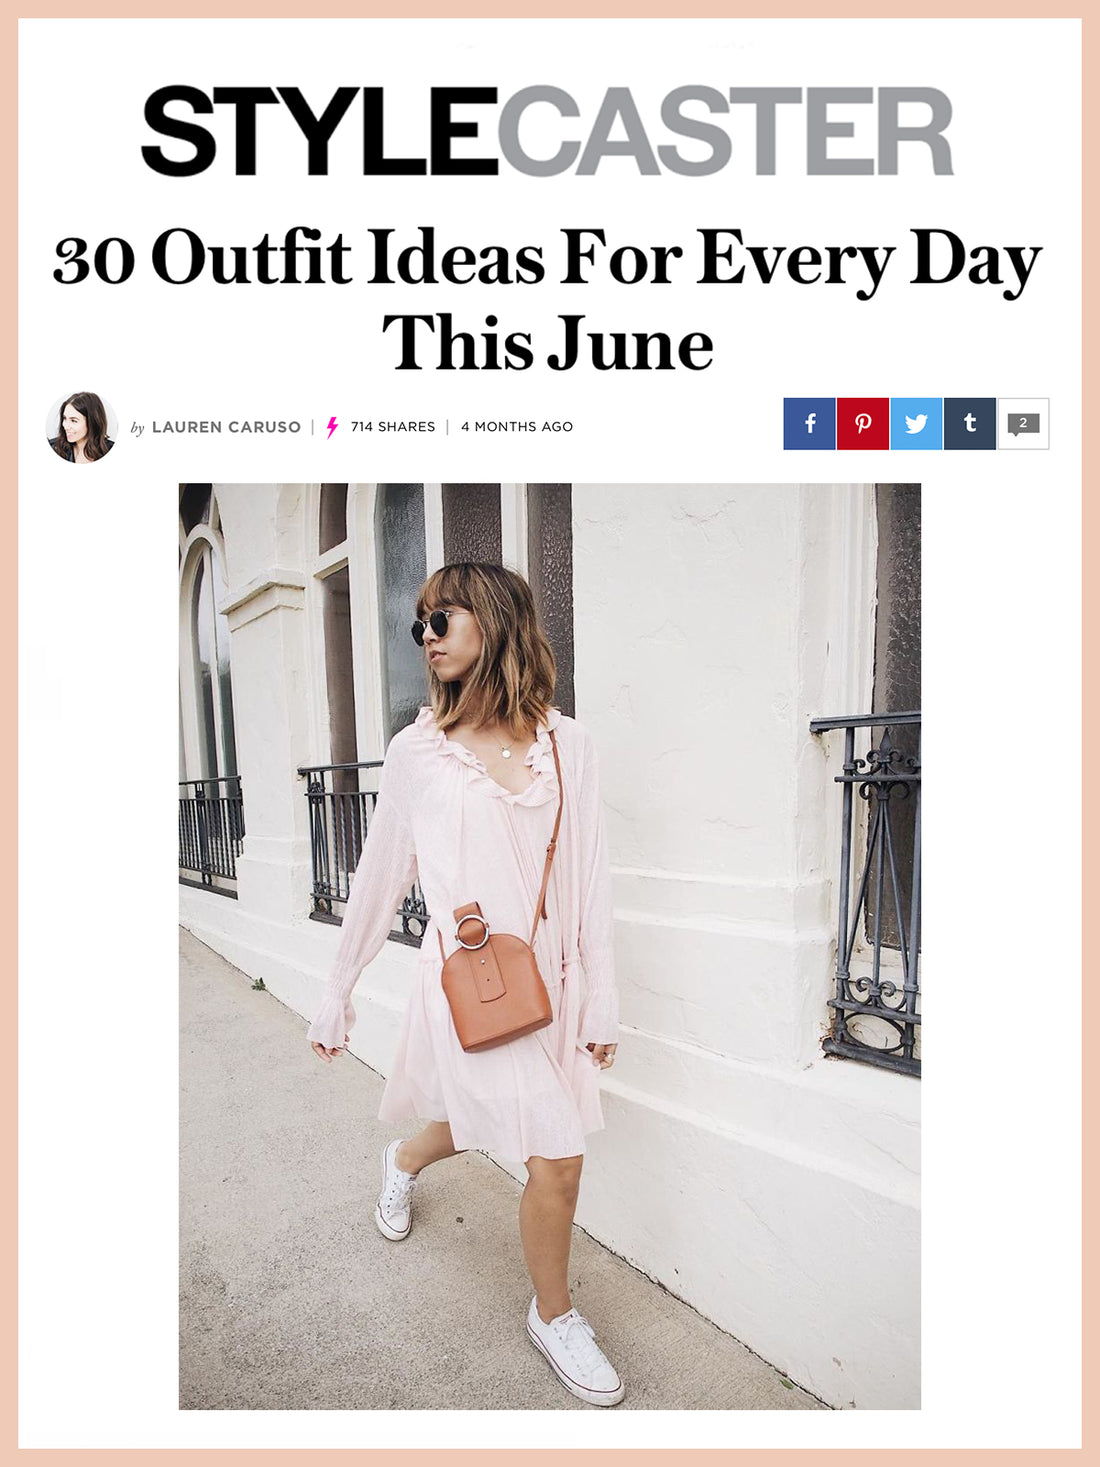 STYLECASTER, 30 Outfit Ideas For Every Day This June